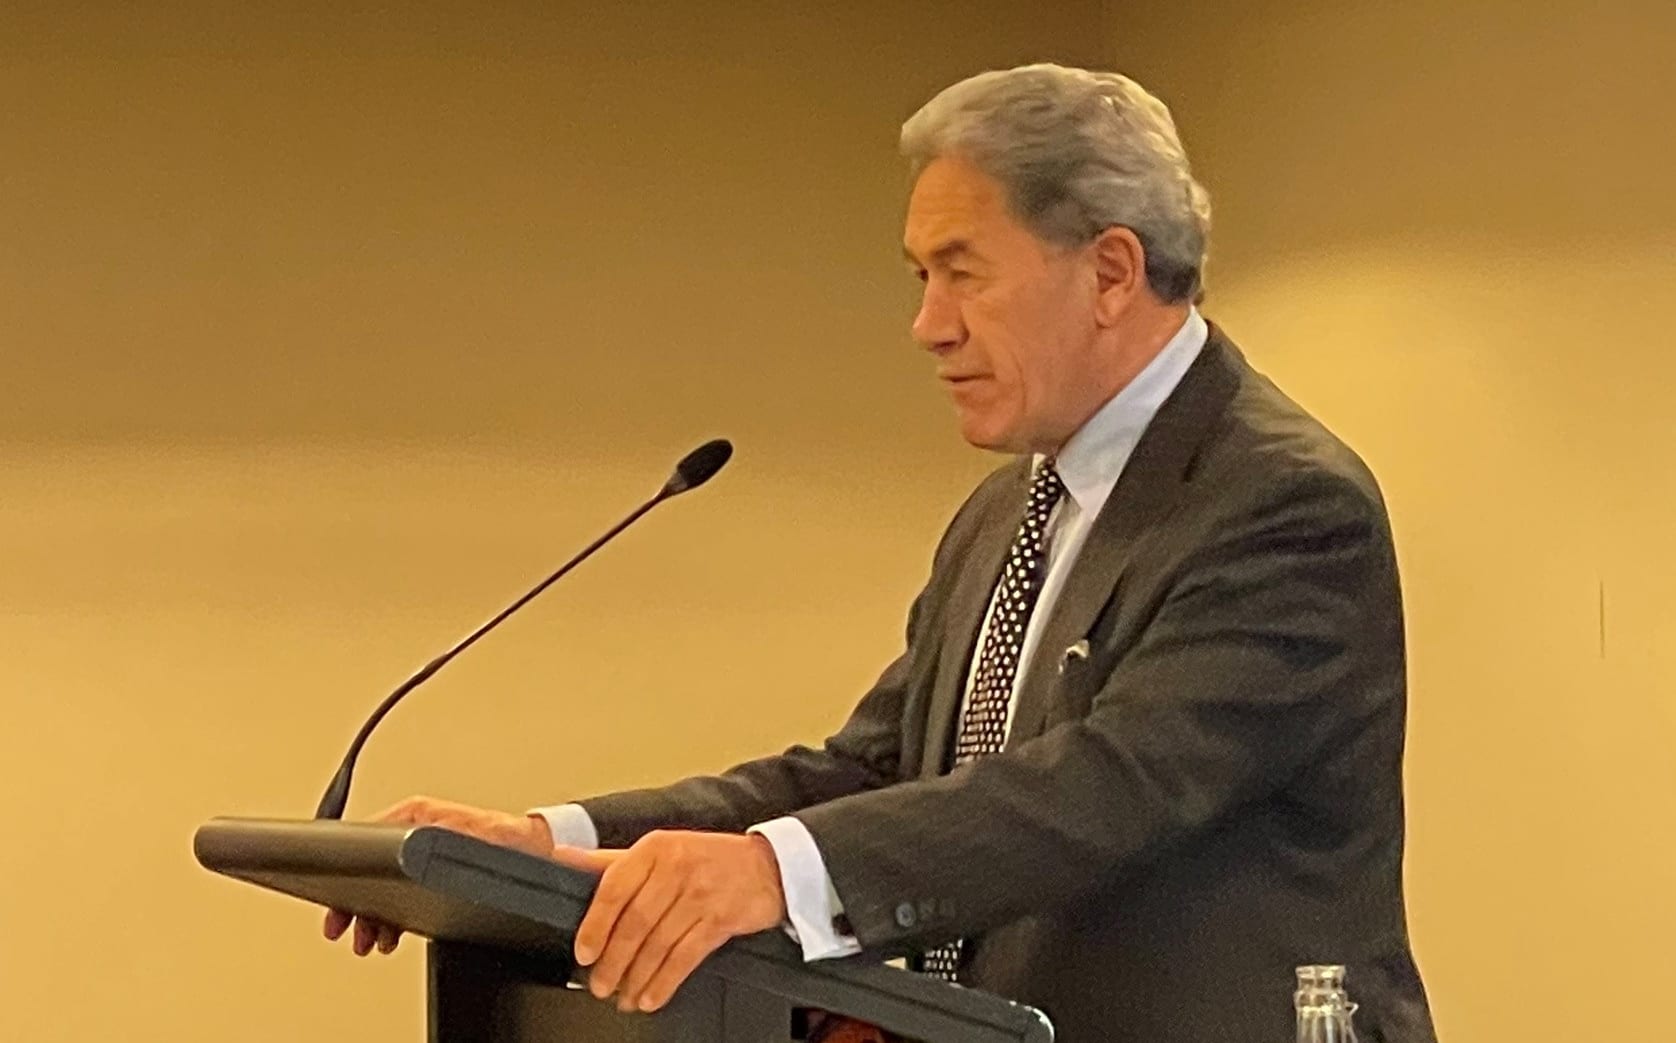 New Zealand First leader Winston Peters speaking at the party's AGM on 20 June, 2021.